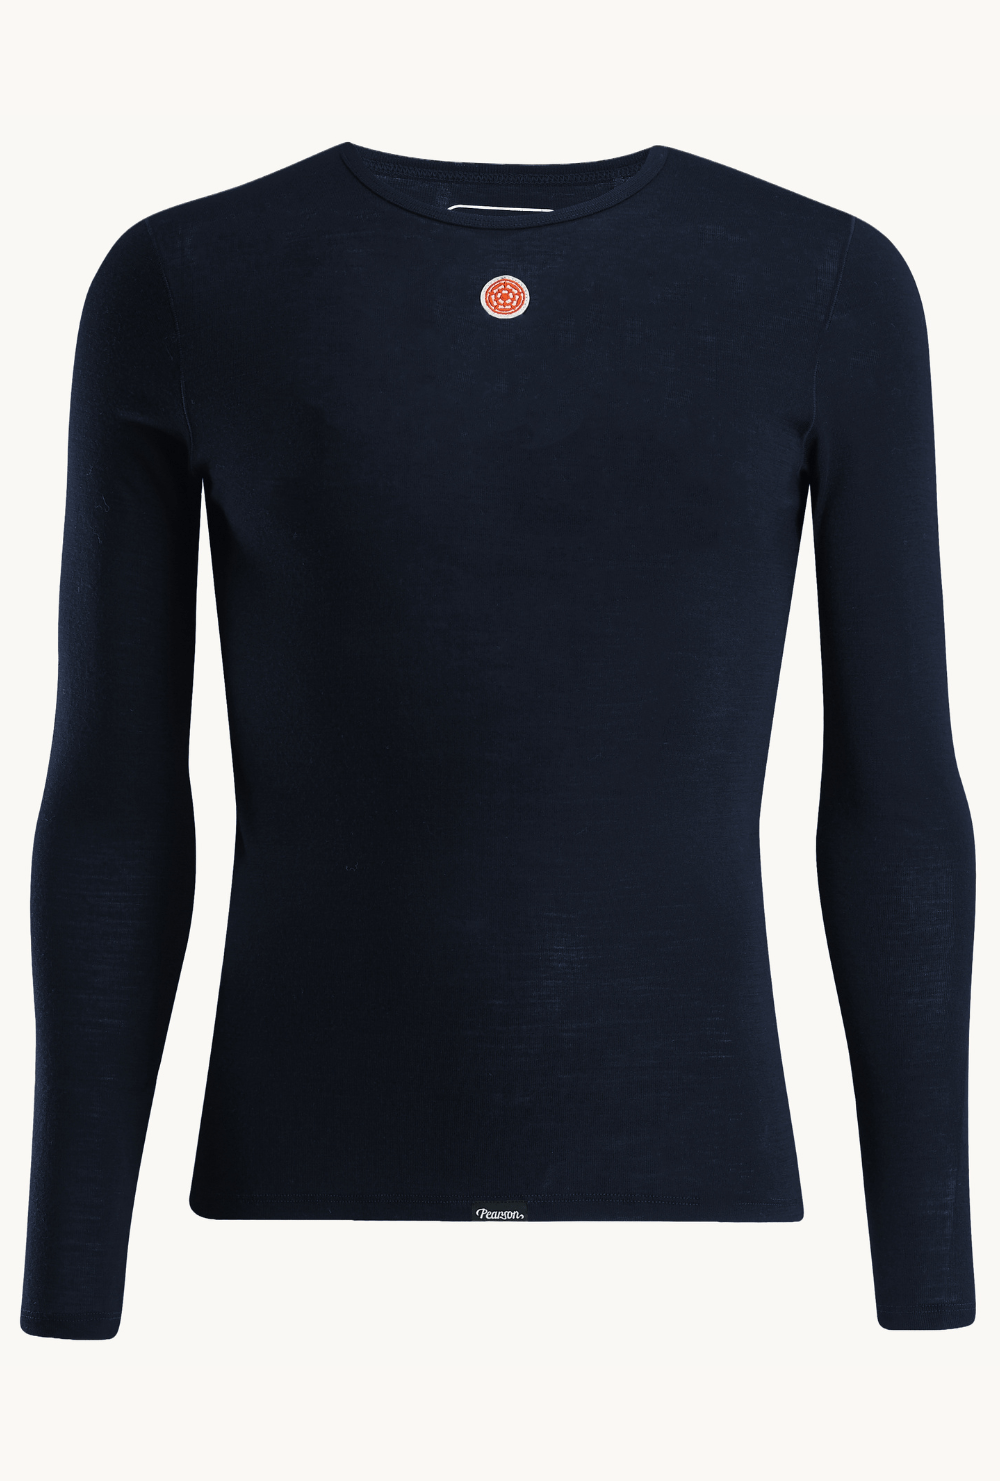 Pearson 1860  Skin In The Game - Long Sleeve Base Layer Navy Blue  Navy Blue / Medium